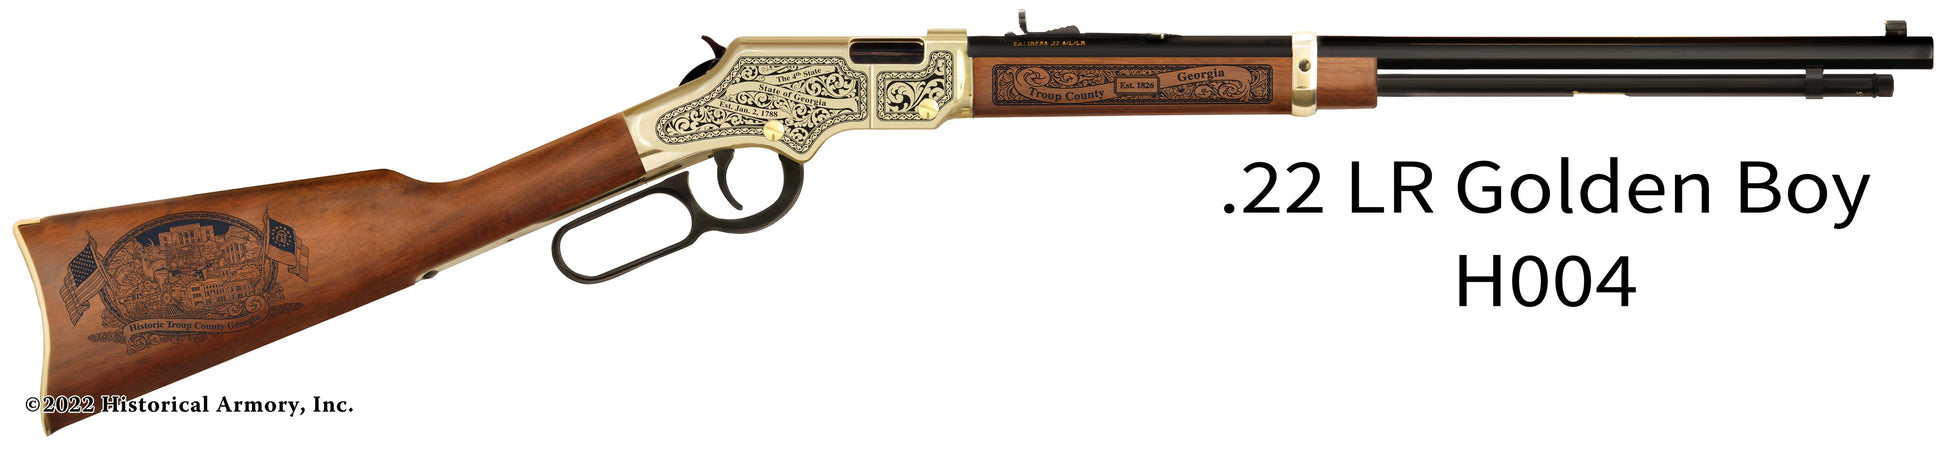 Troup County Georgia Engraved Henry Golden Boy Rifle